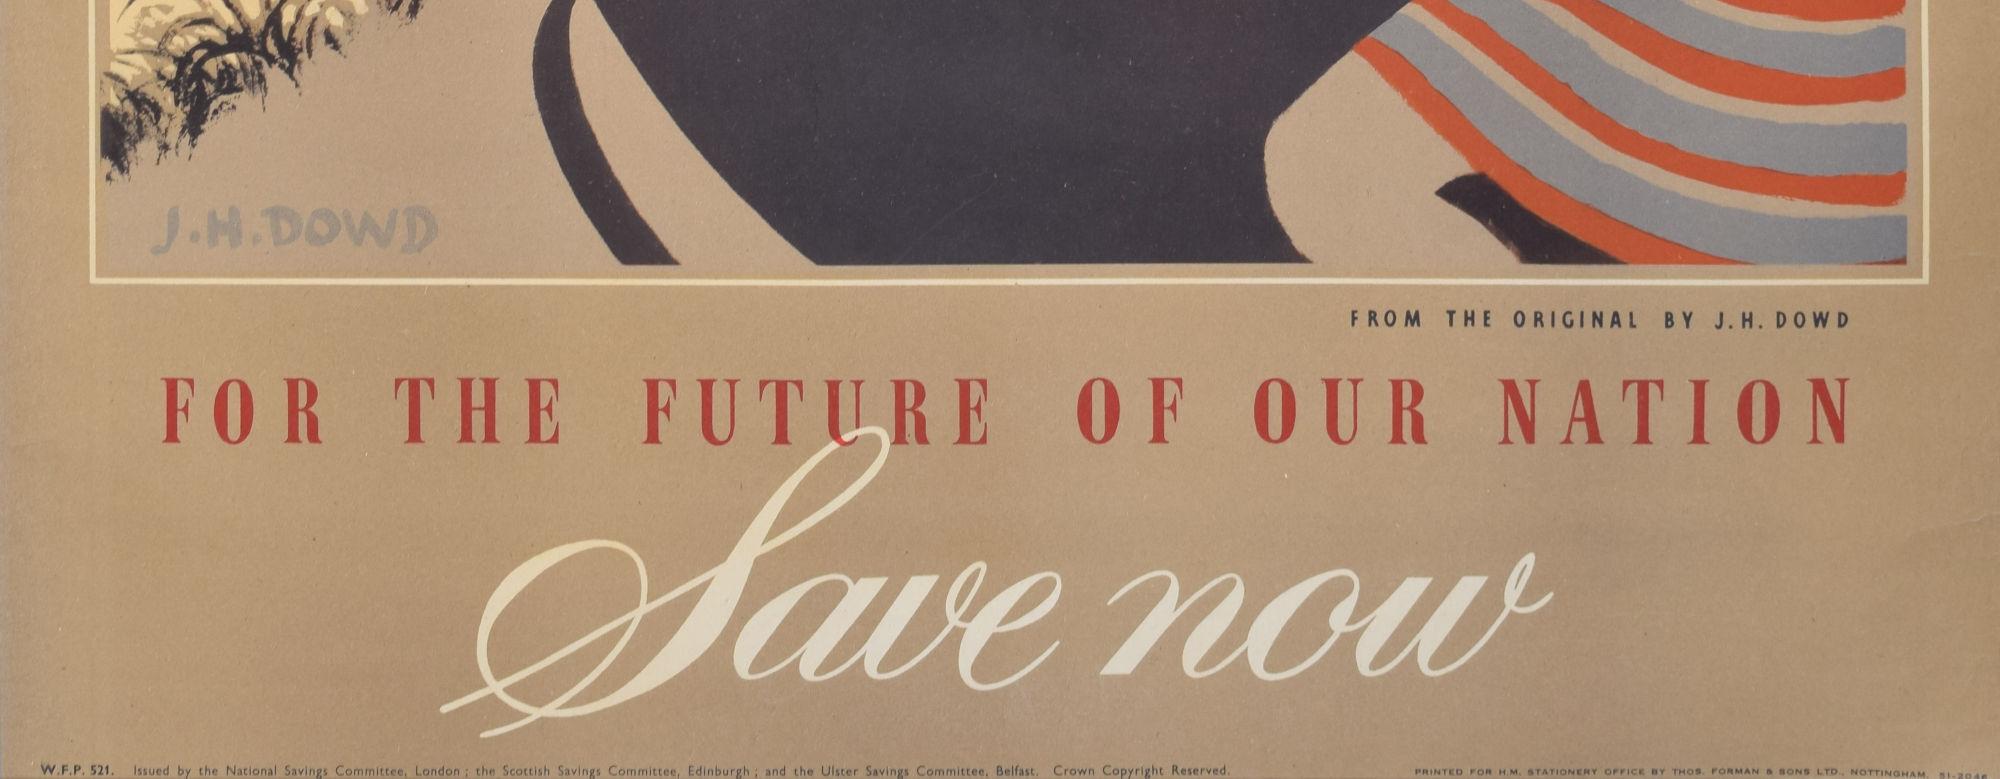 For the Future of our Nation - Save Now original vintage poster by James Dowd For Sale 3